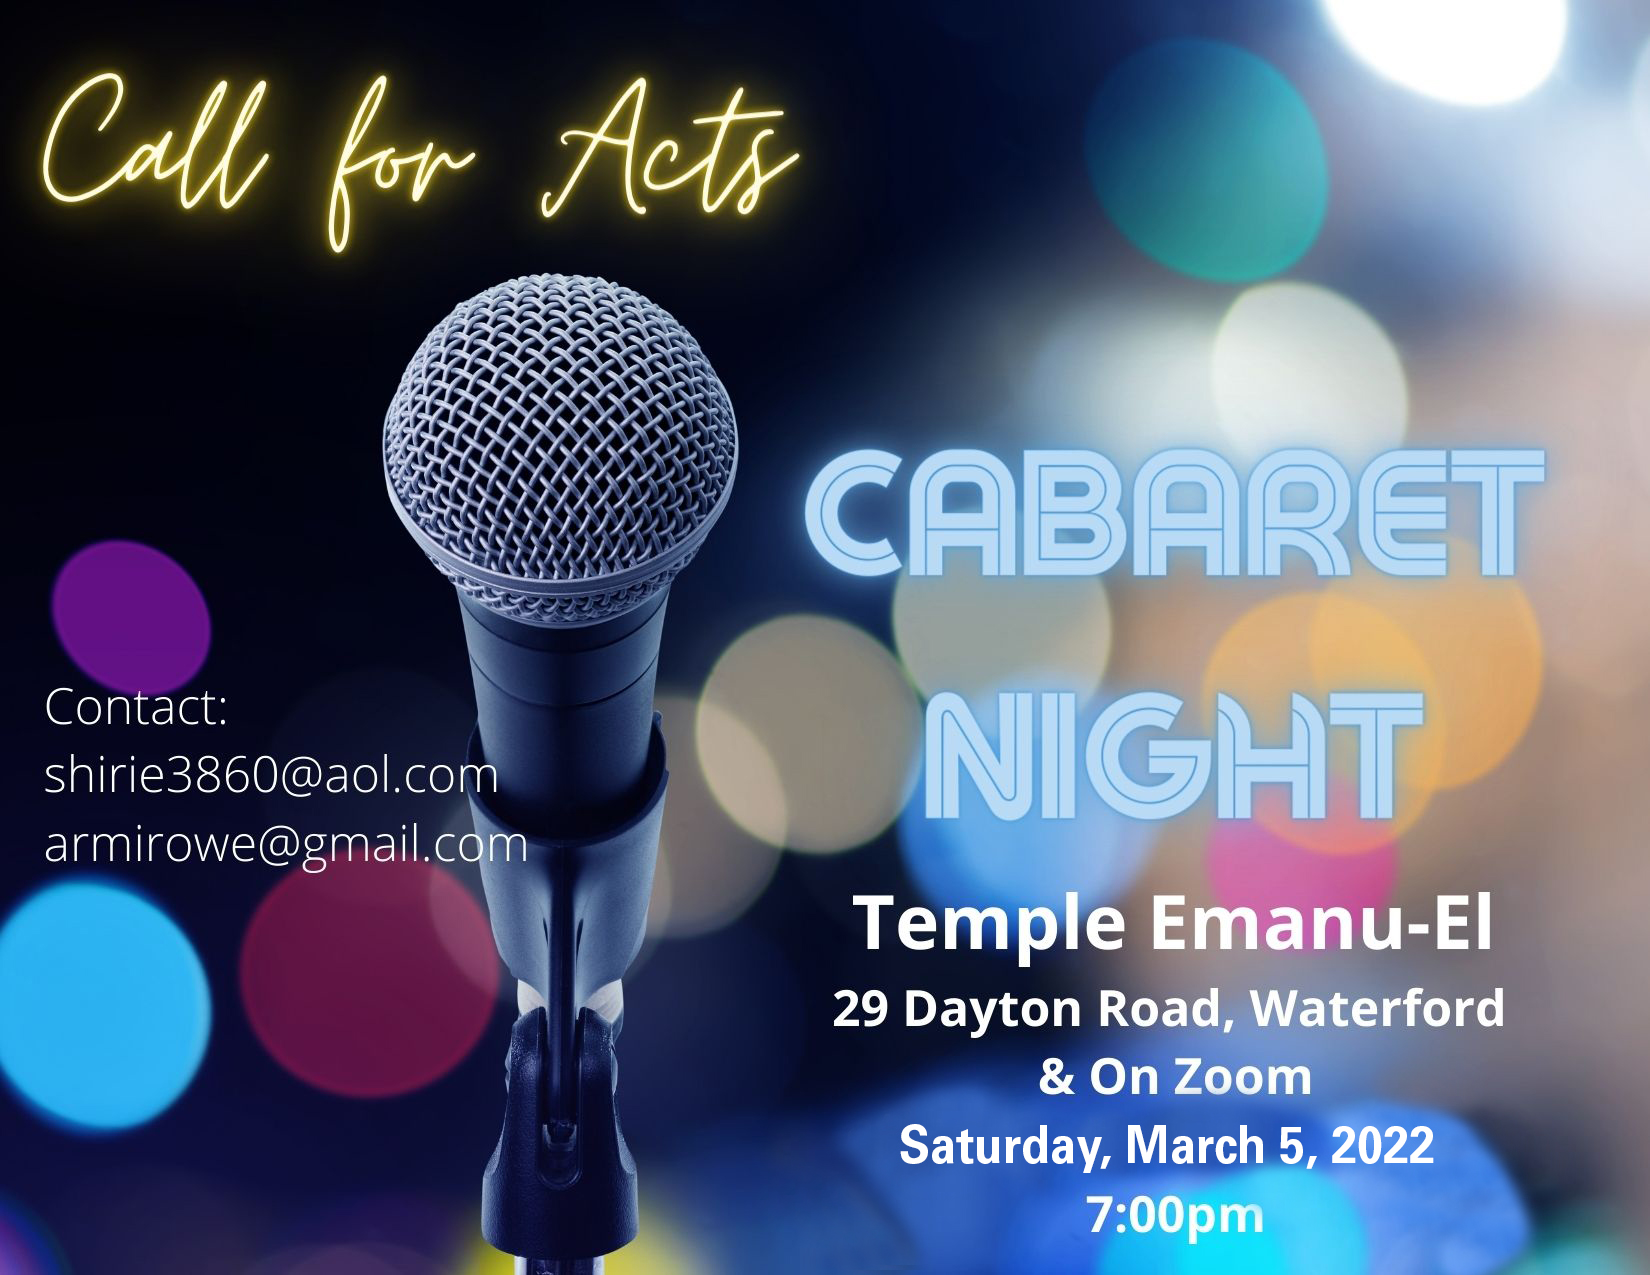 Cabaret – Call for Acts